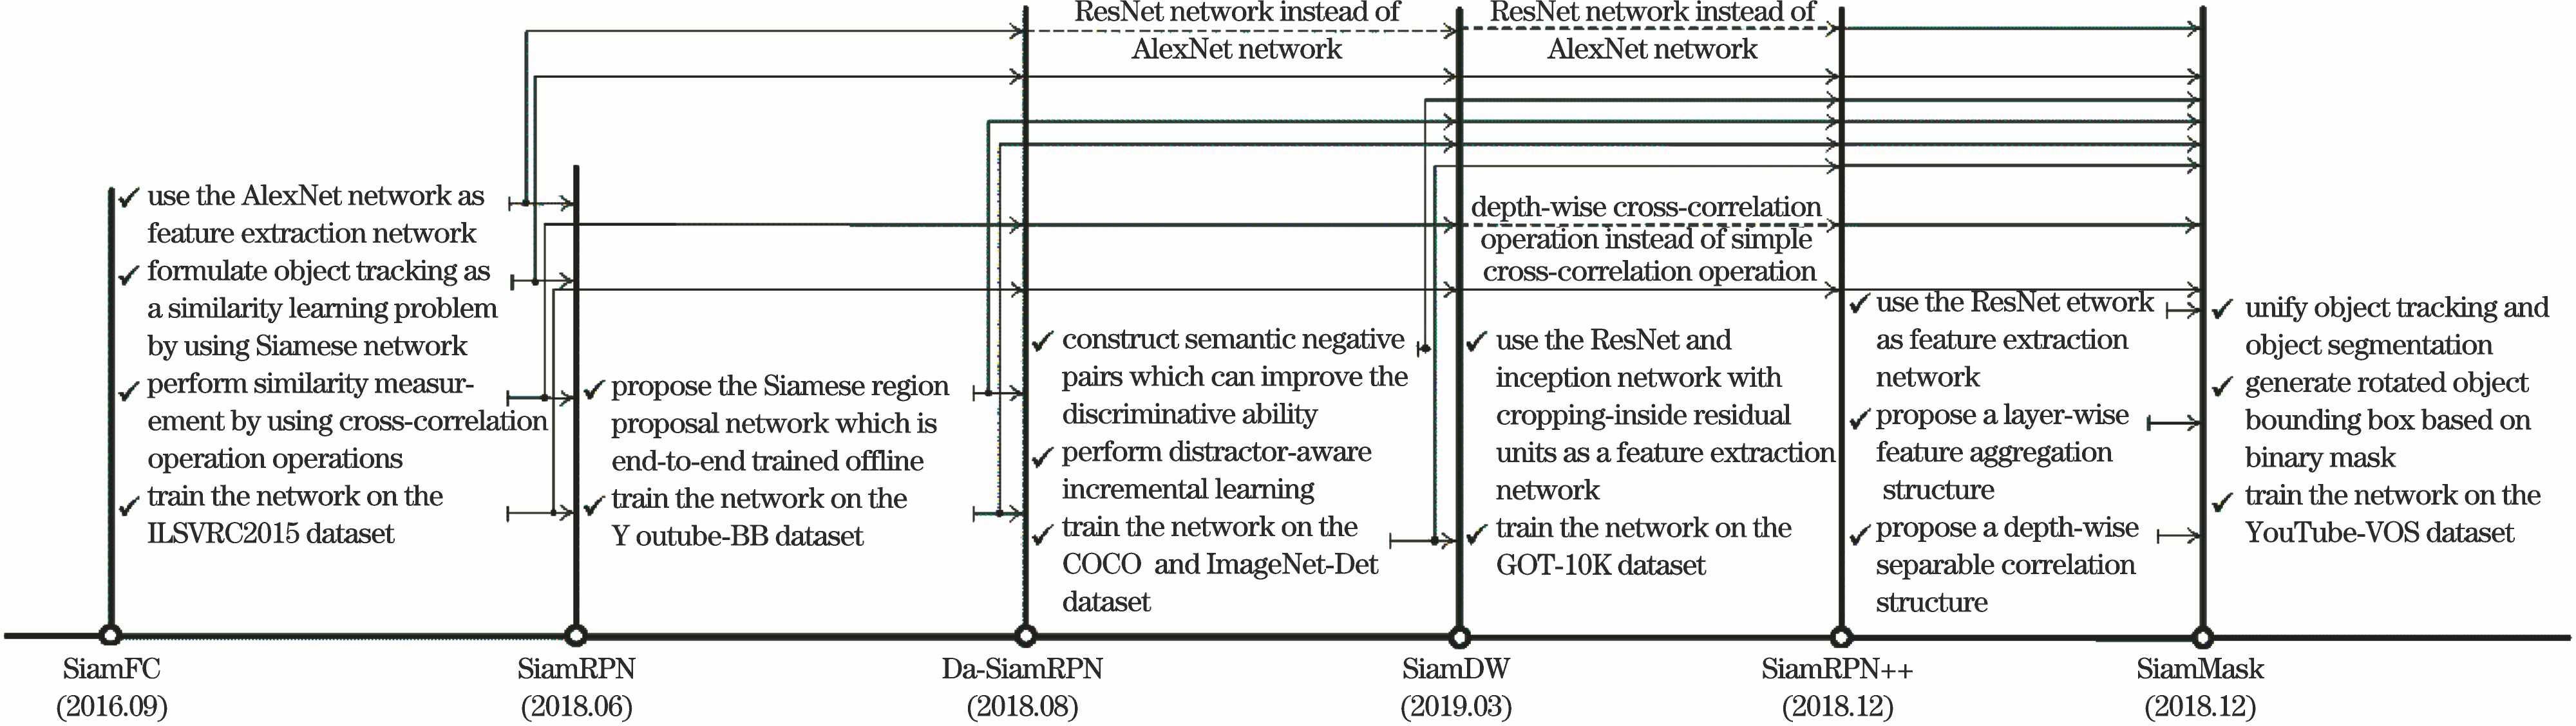 Development process diagram of object tracking algorithm based on Siamese network